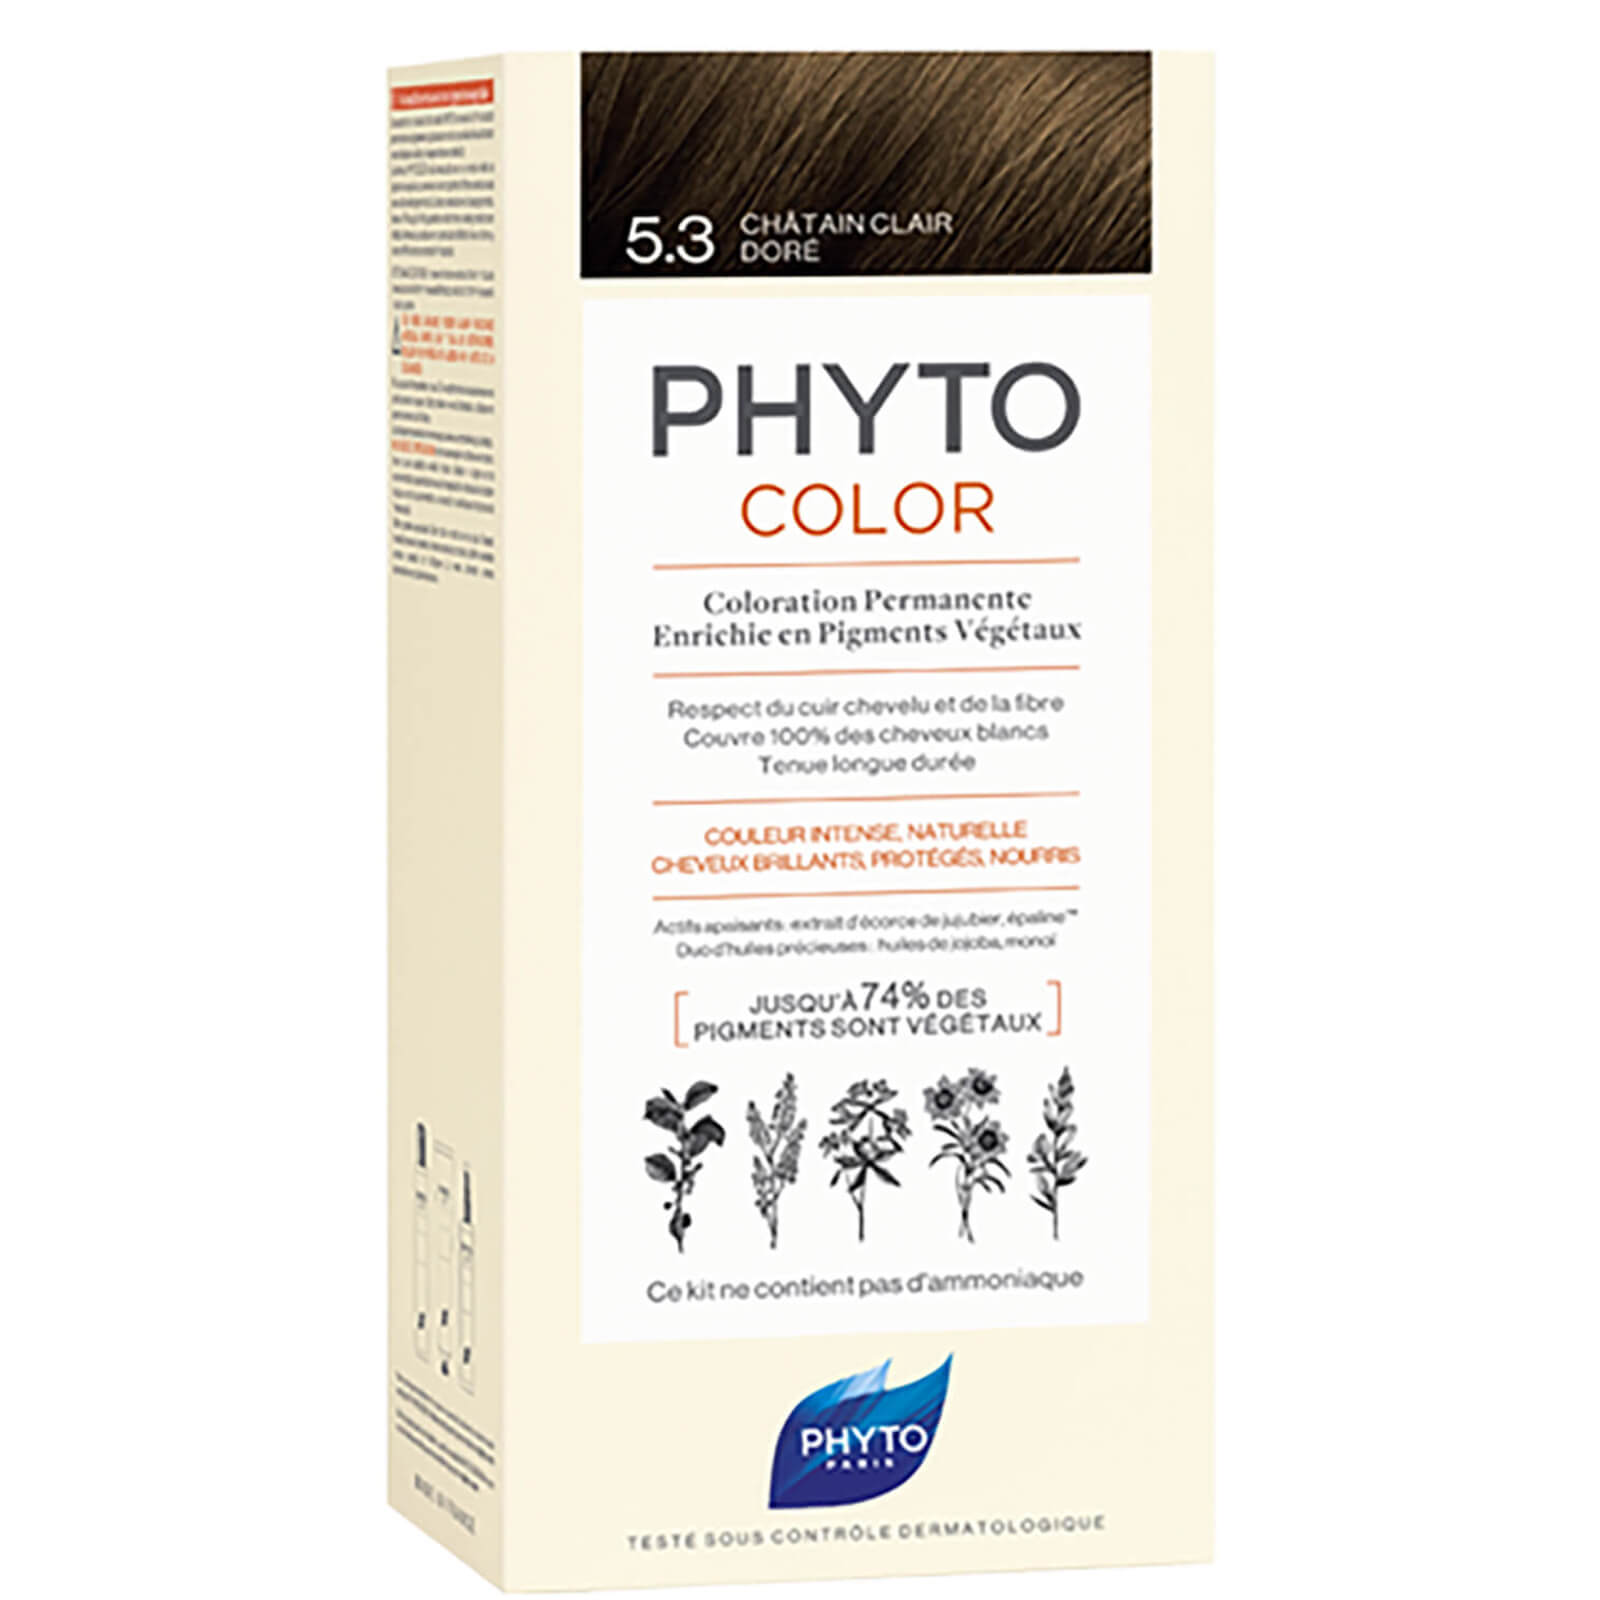 Phyto Color - 5.3 Light Golden Brown 180g